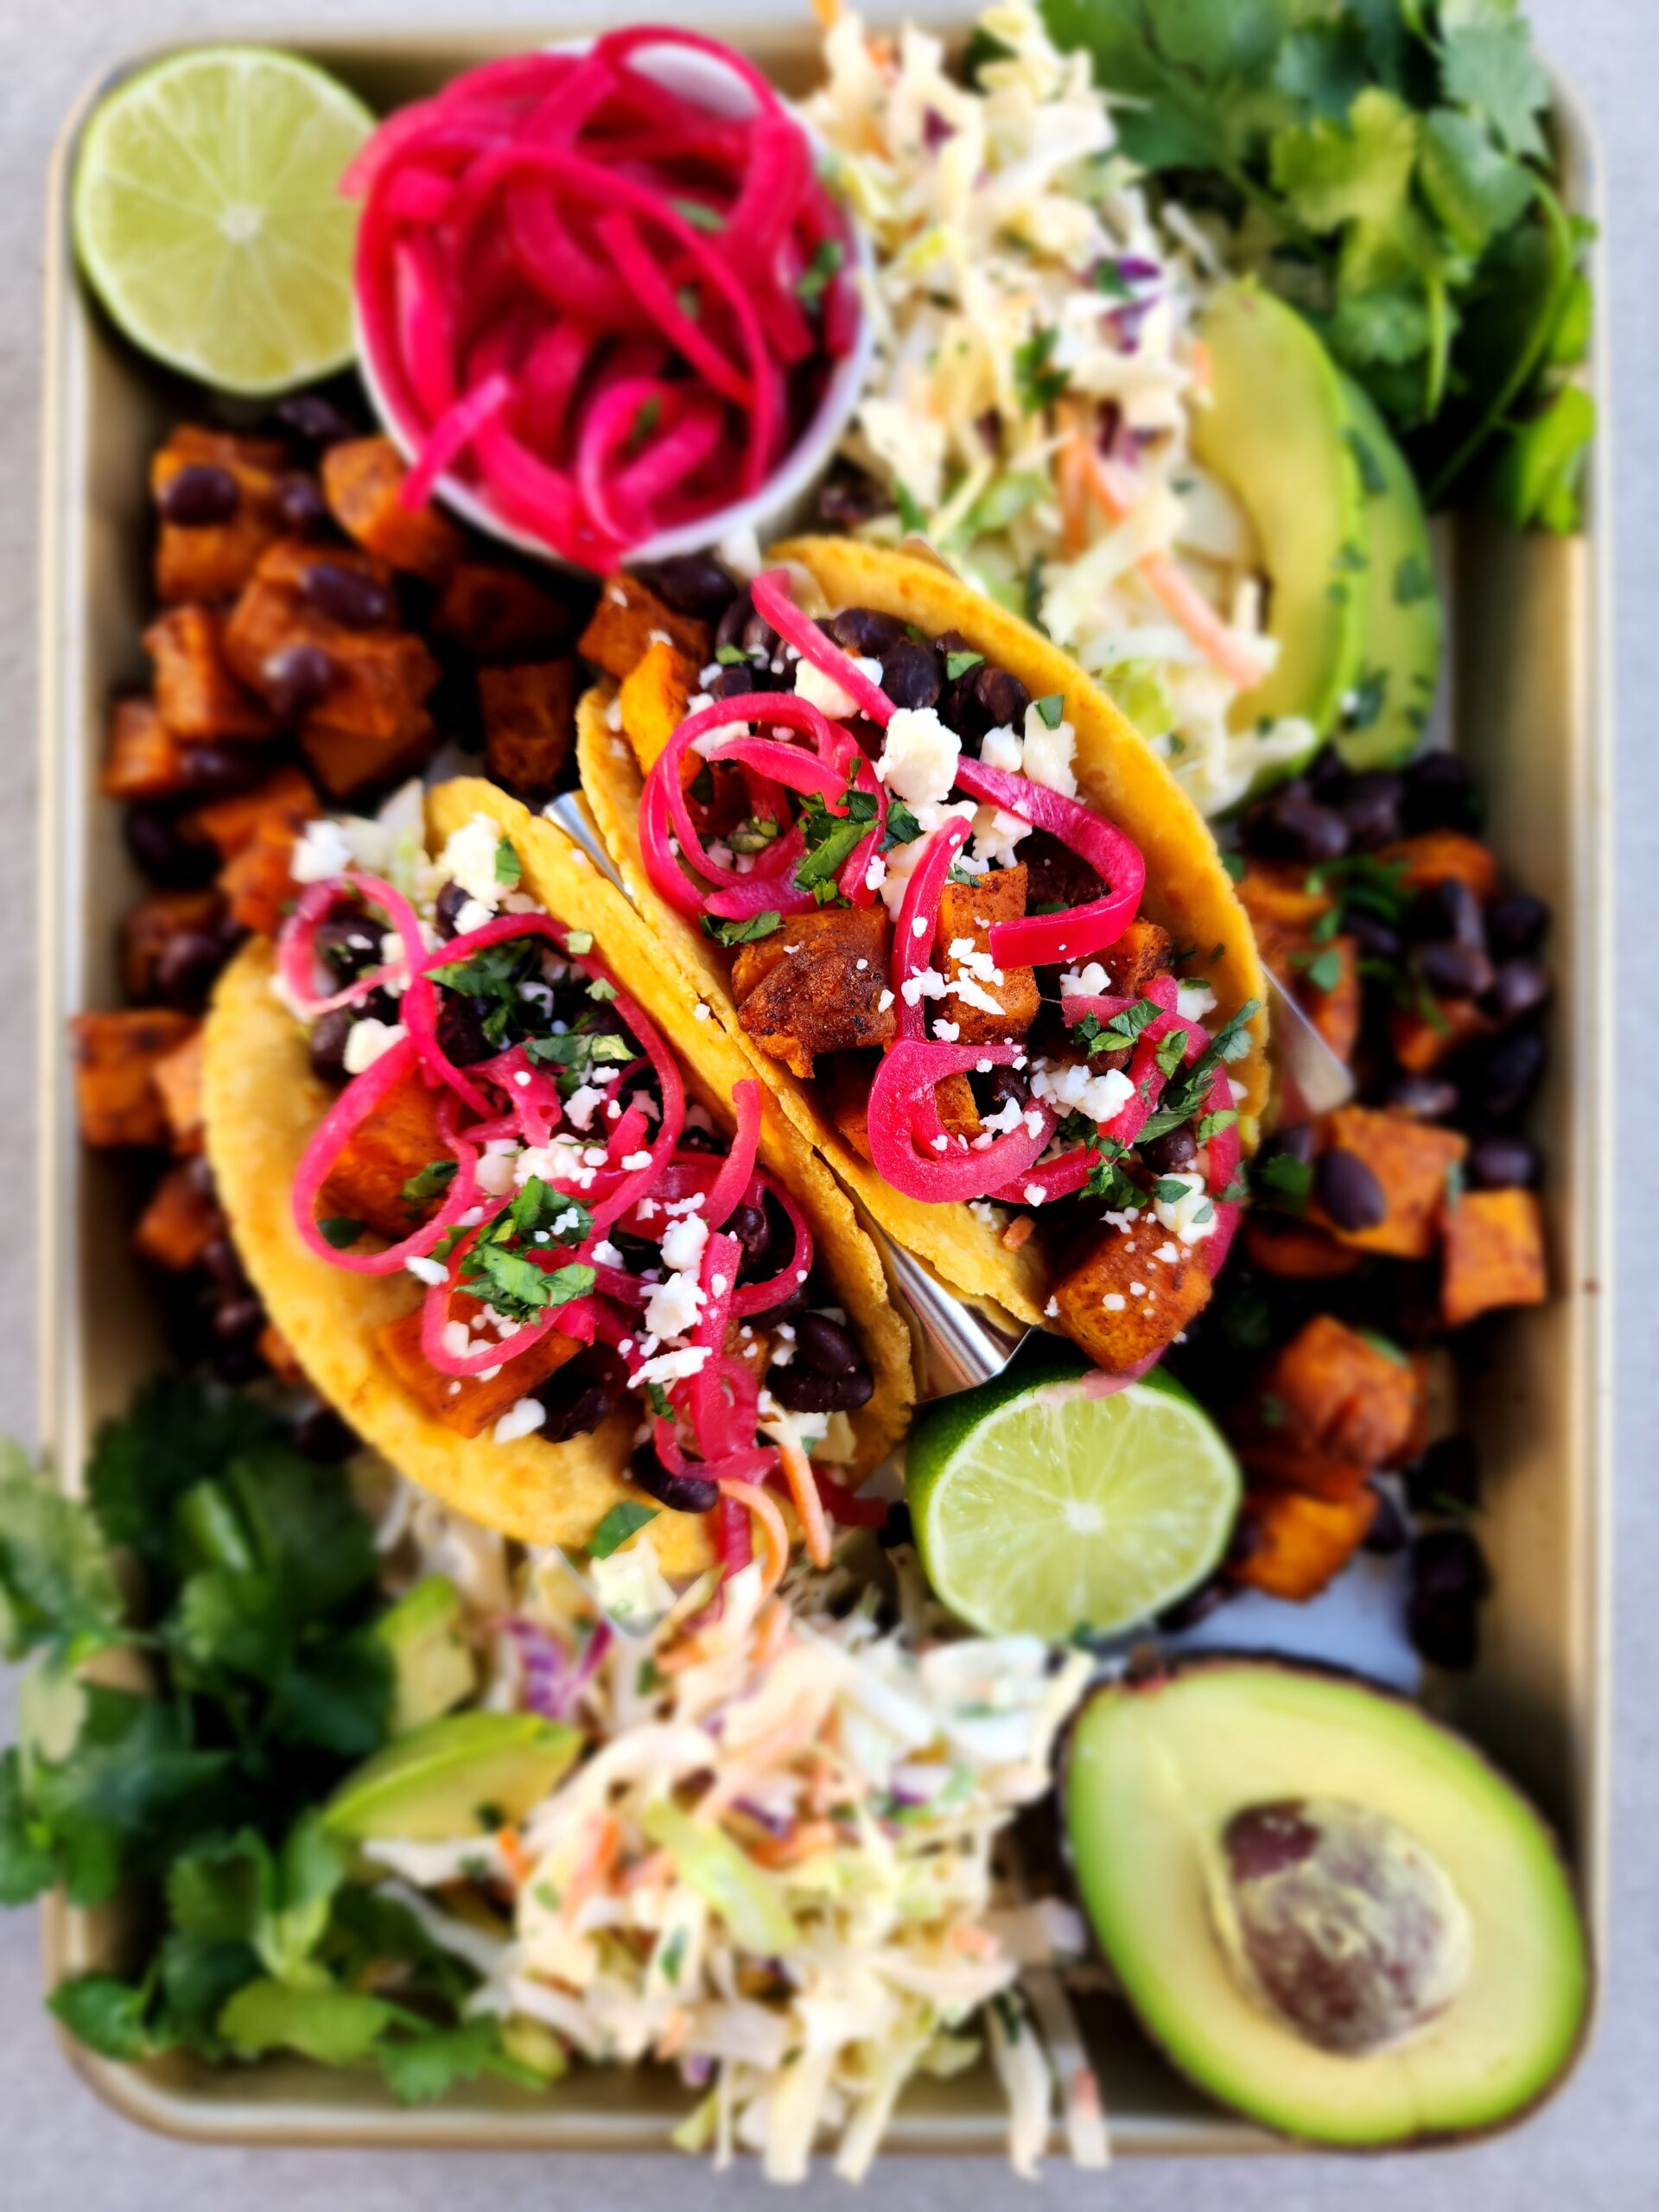 Roasted Butternut Squash and Black Bean Tacos on a sheet tray with avocado, coleslaw, pickled onions, and lime